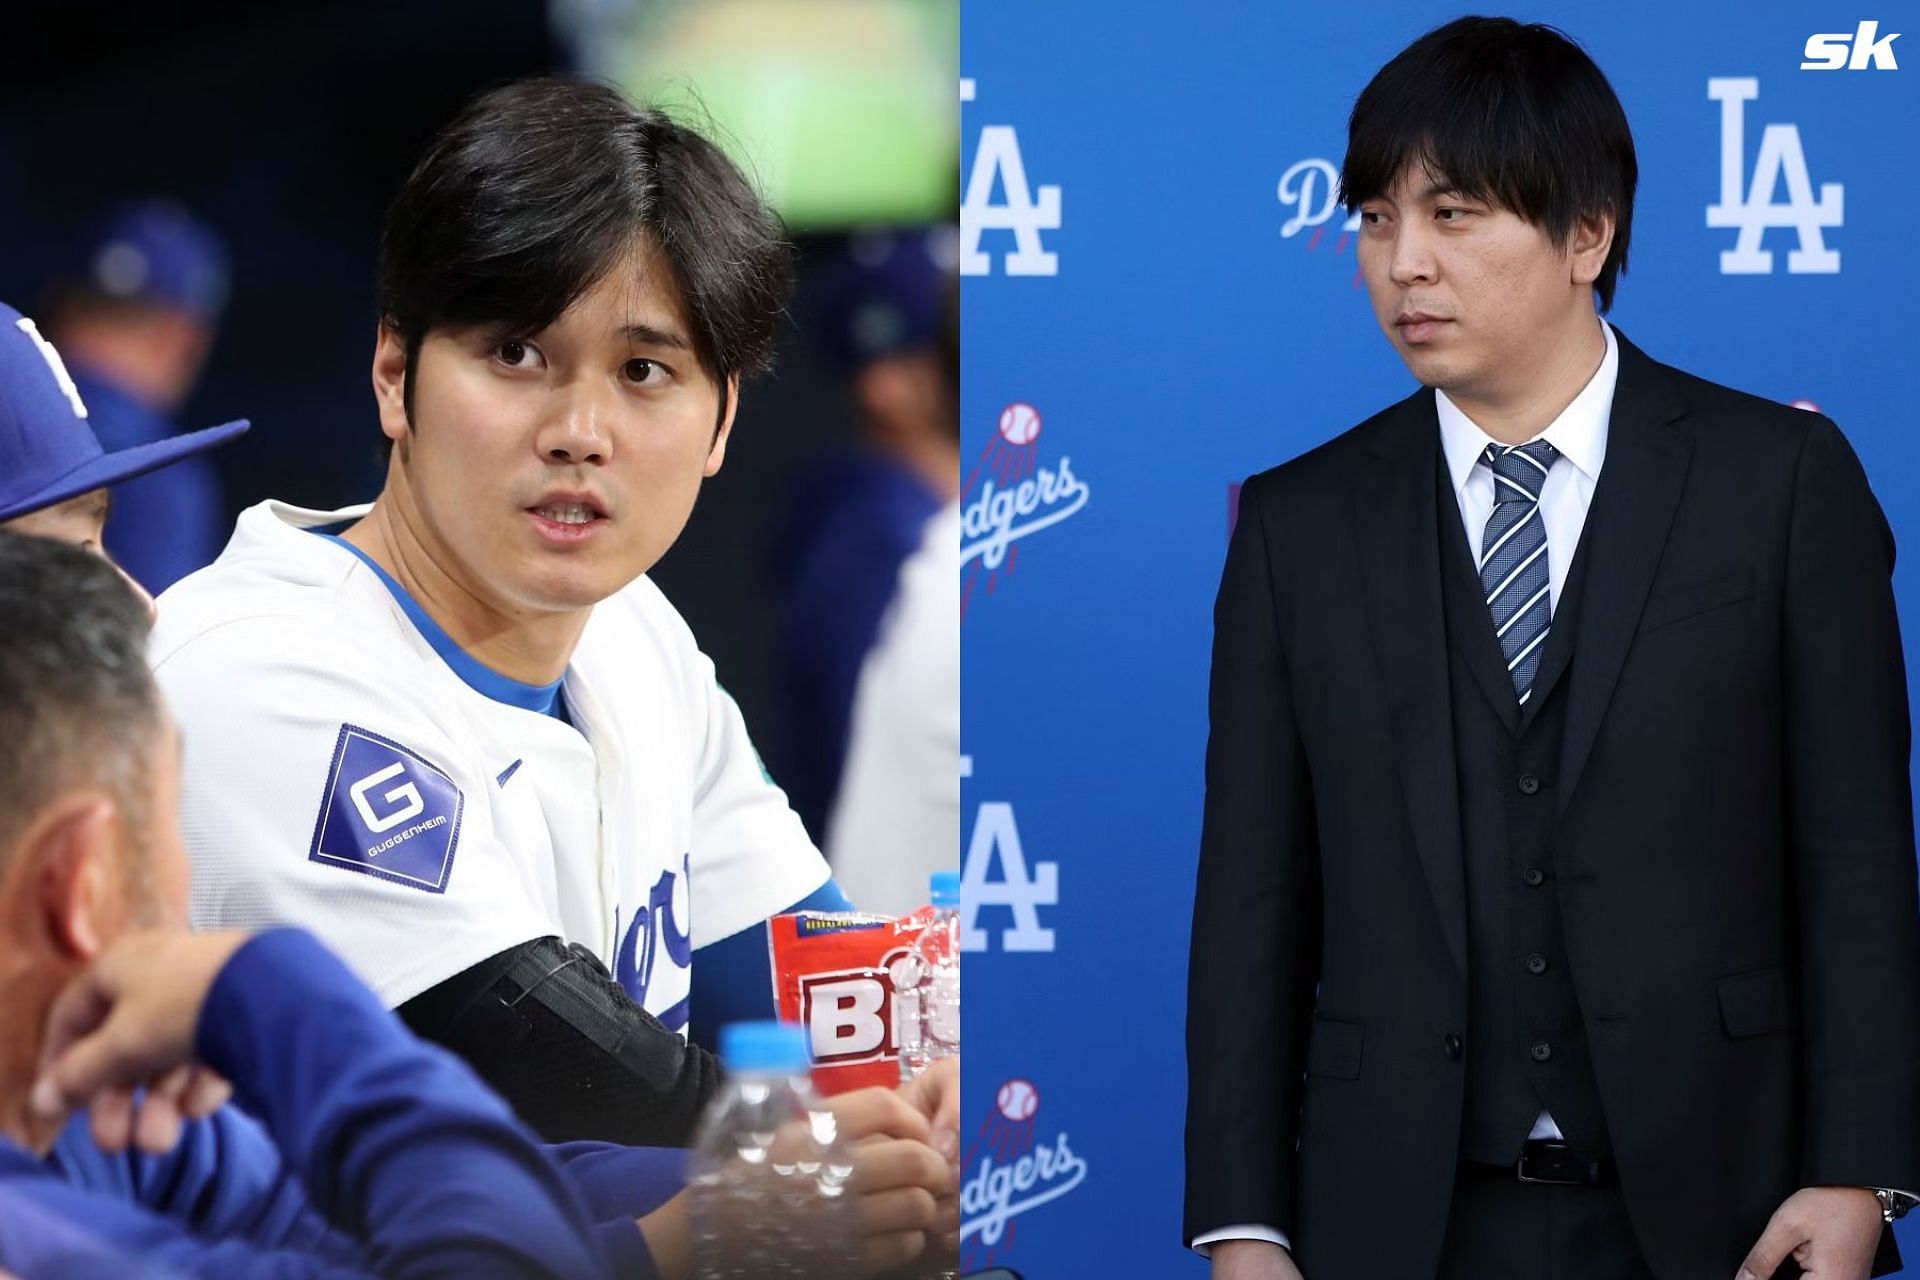 MLB fans not buying reports that Ohtani was unaware of Mizuhara